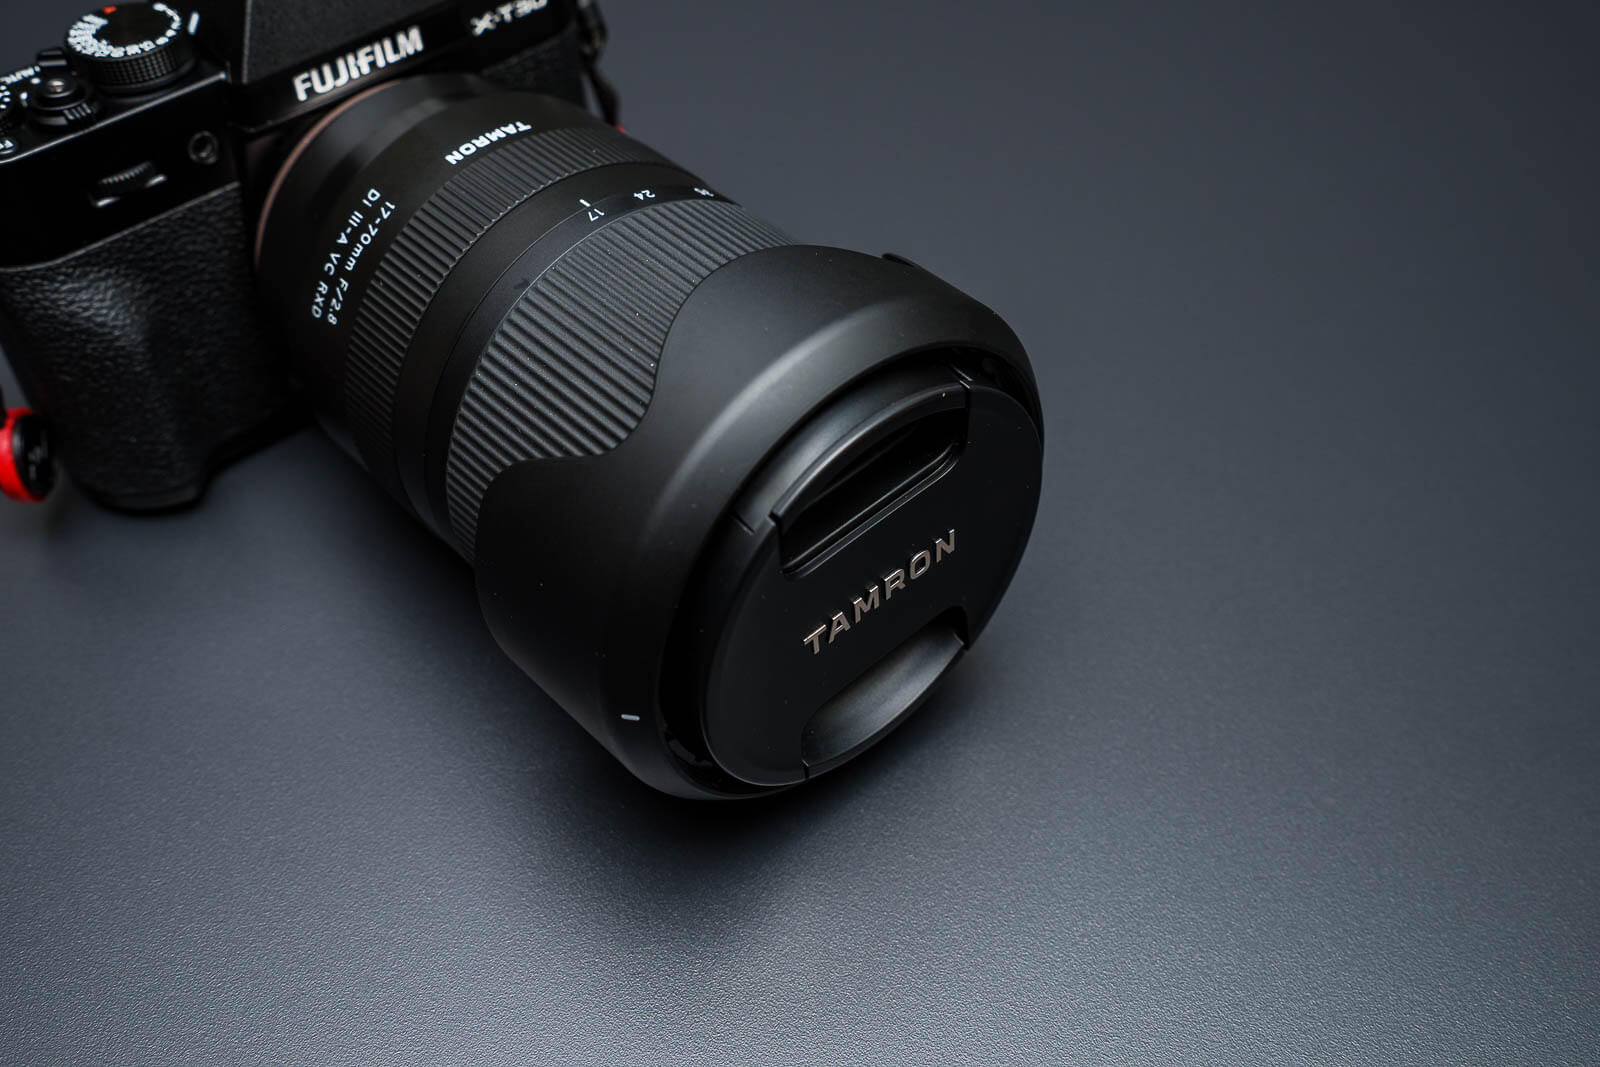 Tamron 17-70mm f/2.8 for Fujifilm review: Lightweight with 